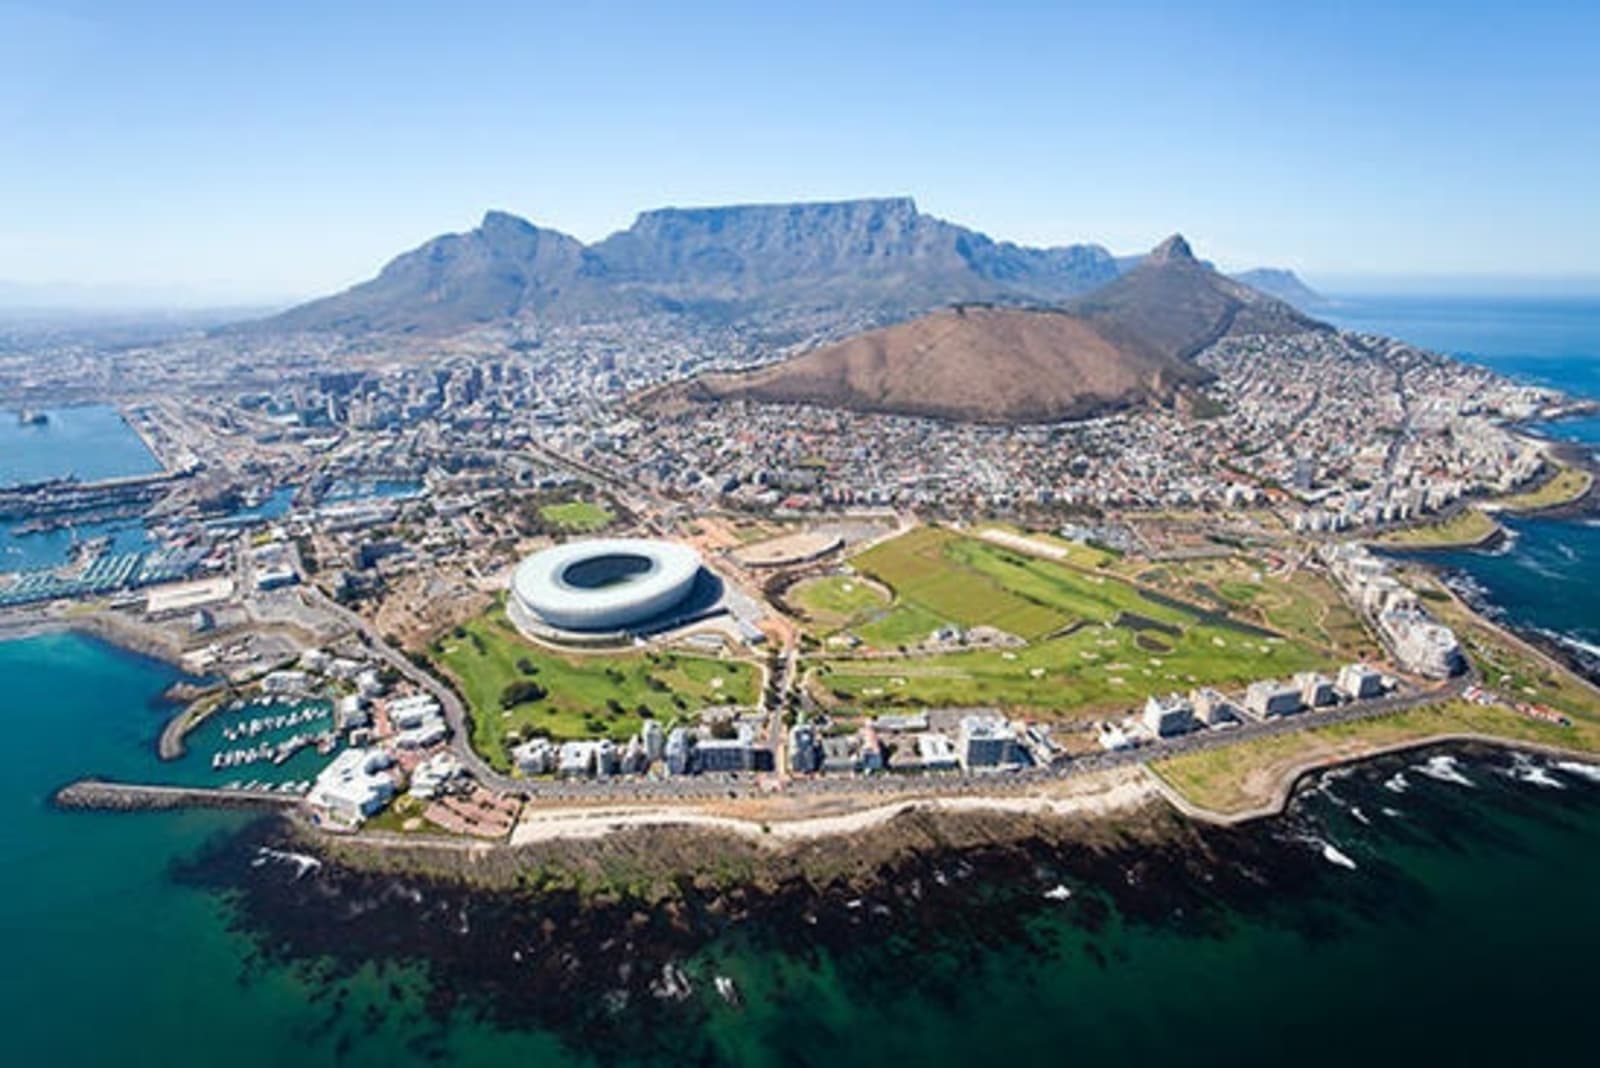 rs-cape-town-aerial-shutterstock92510755.jpeg